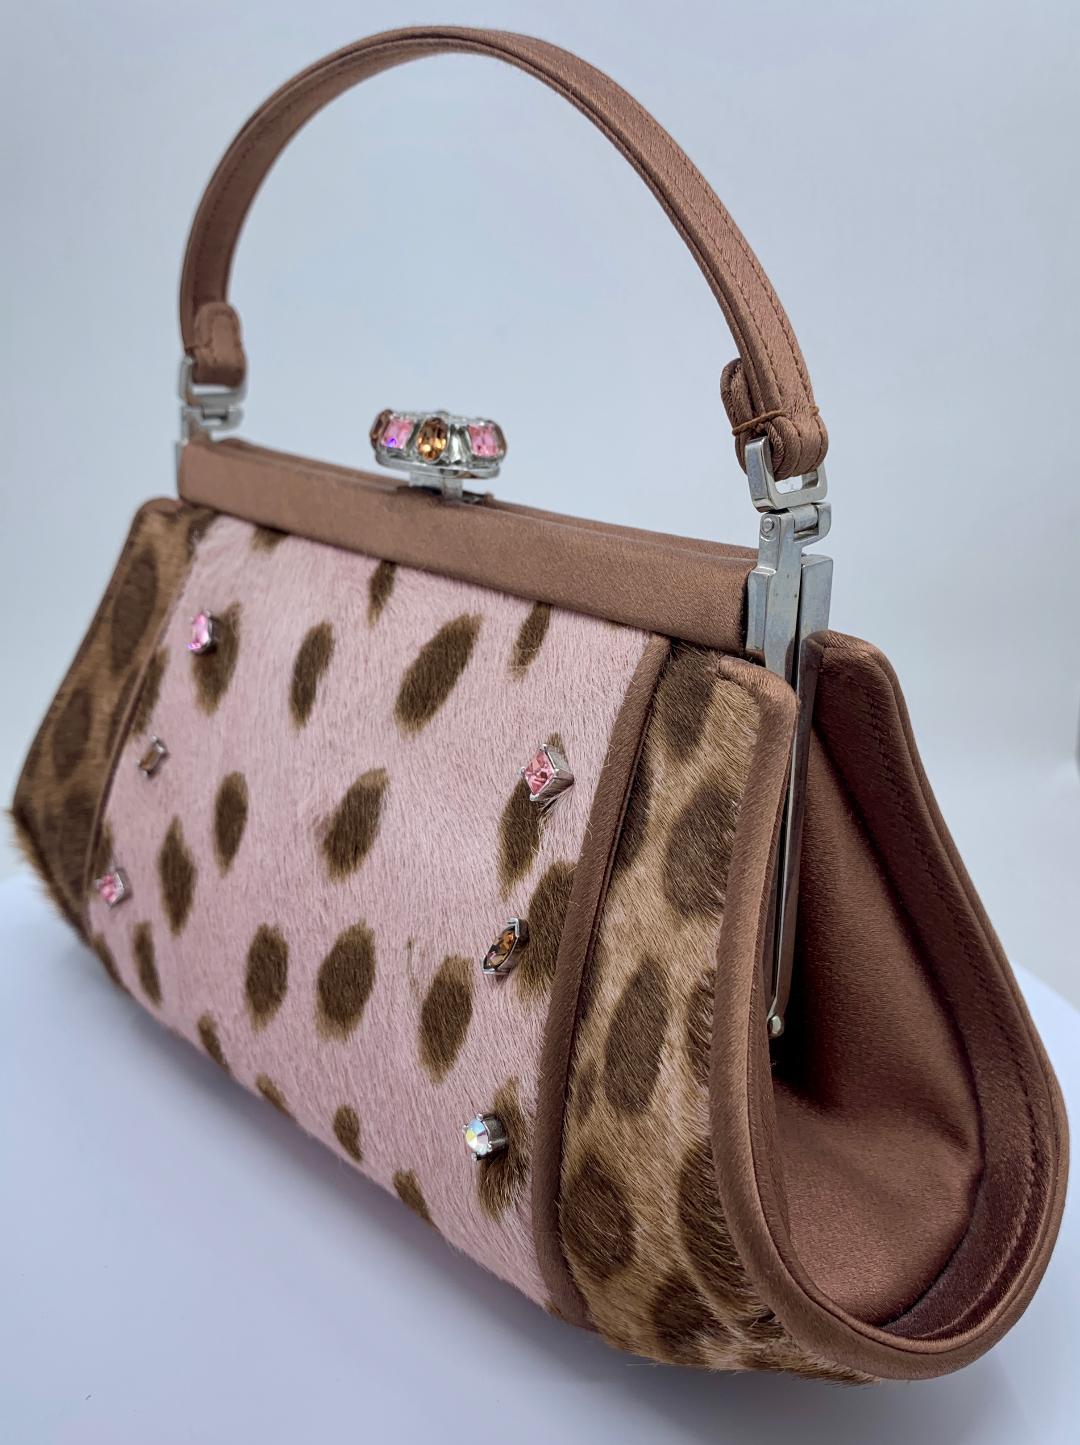 Very stylish and fun, couture designer, Judith Leiber, pony hair leopard print evening purse with hand set jeweled accents, coco brown satin piped trim and matching handle. Purse is lined in a coco brown satin and features a fancy multi colored